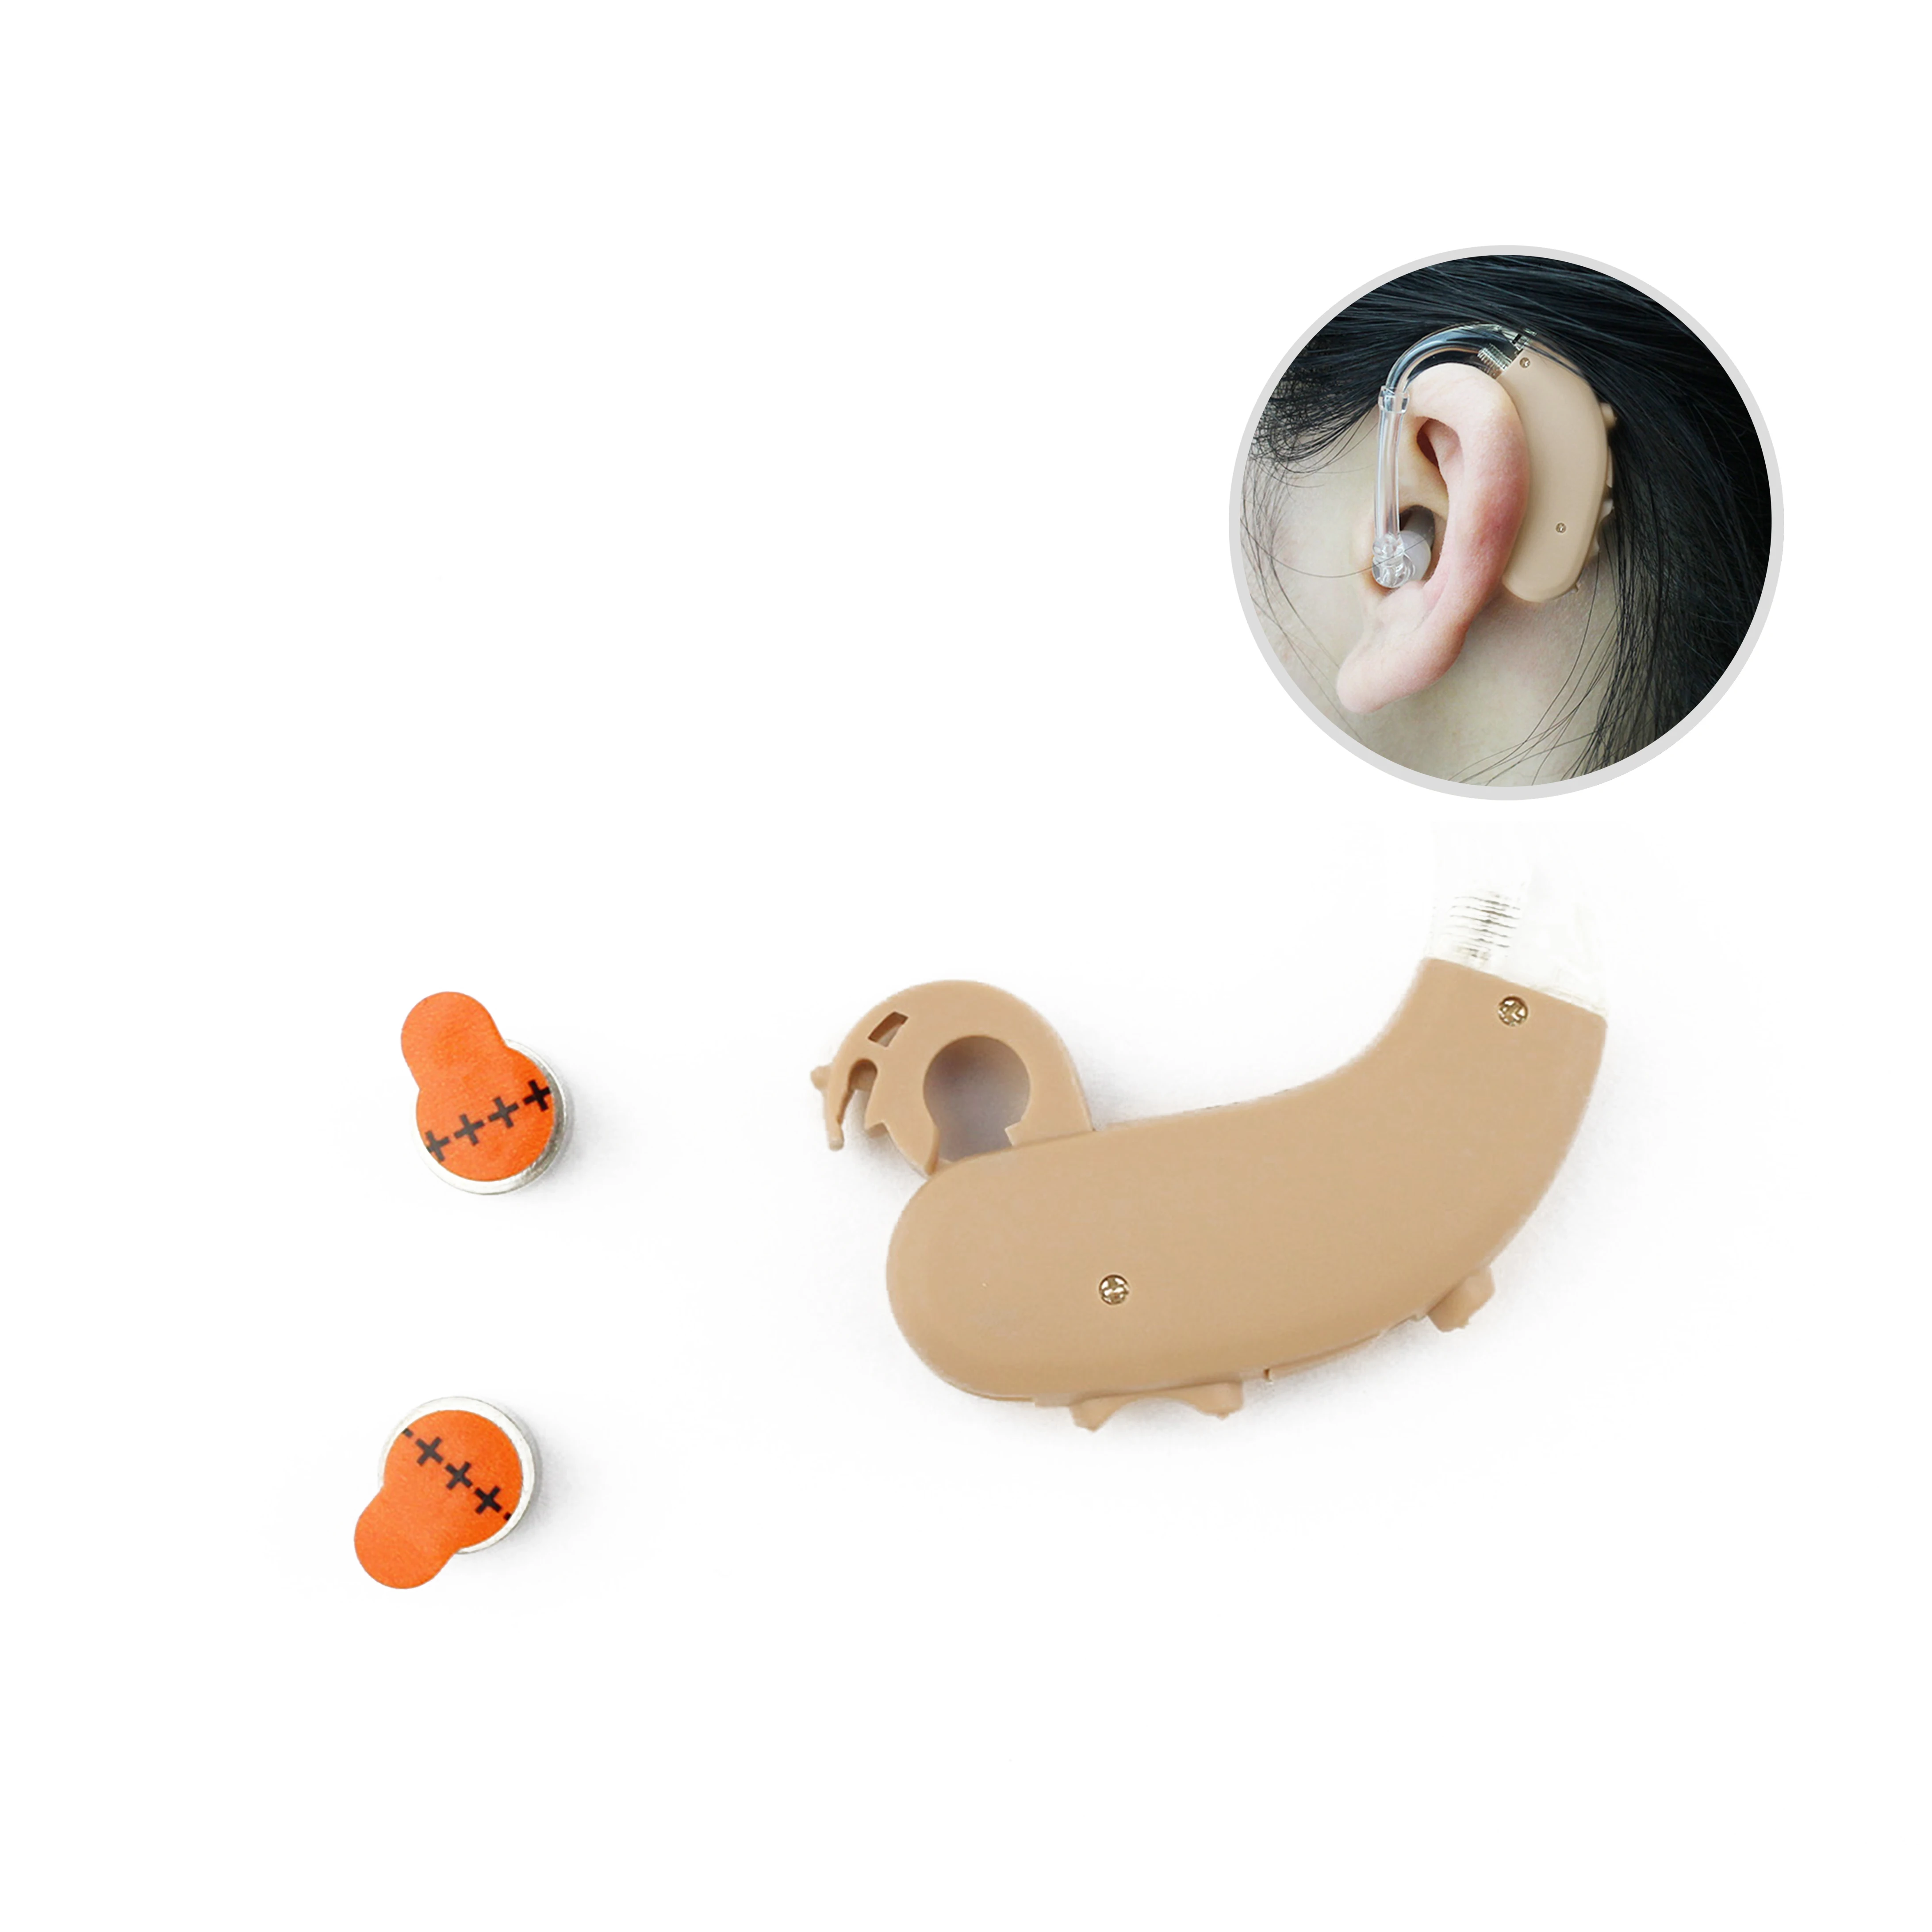 Equivalent to siemens Lotus China hearing amplifier cheap price digital BTE hearing aid